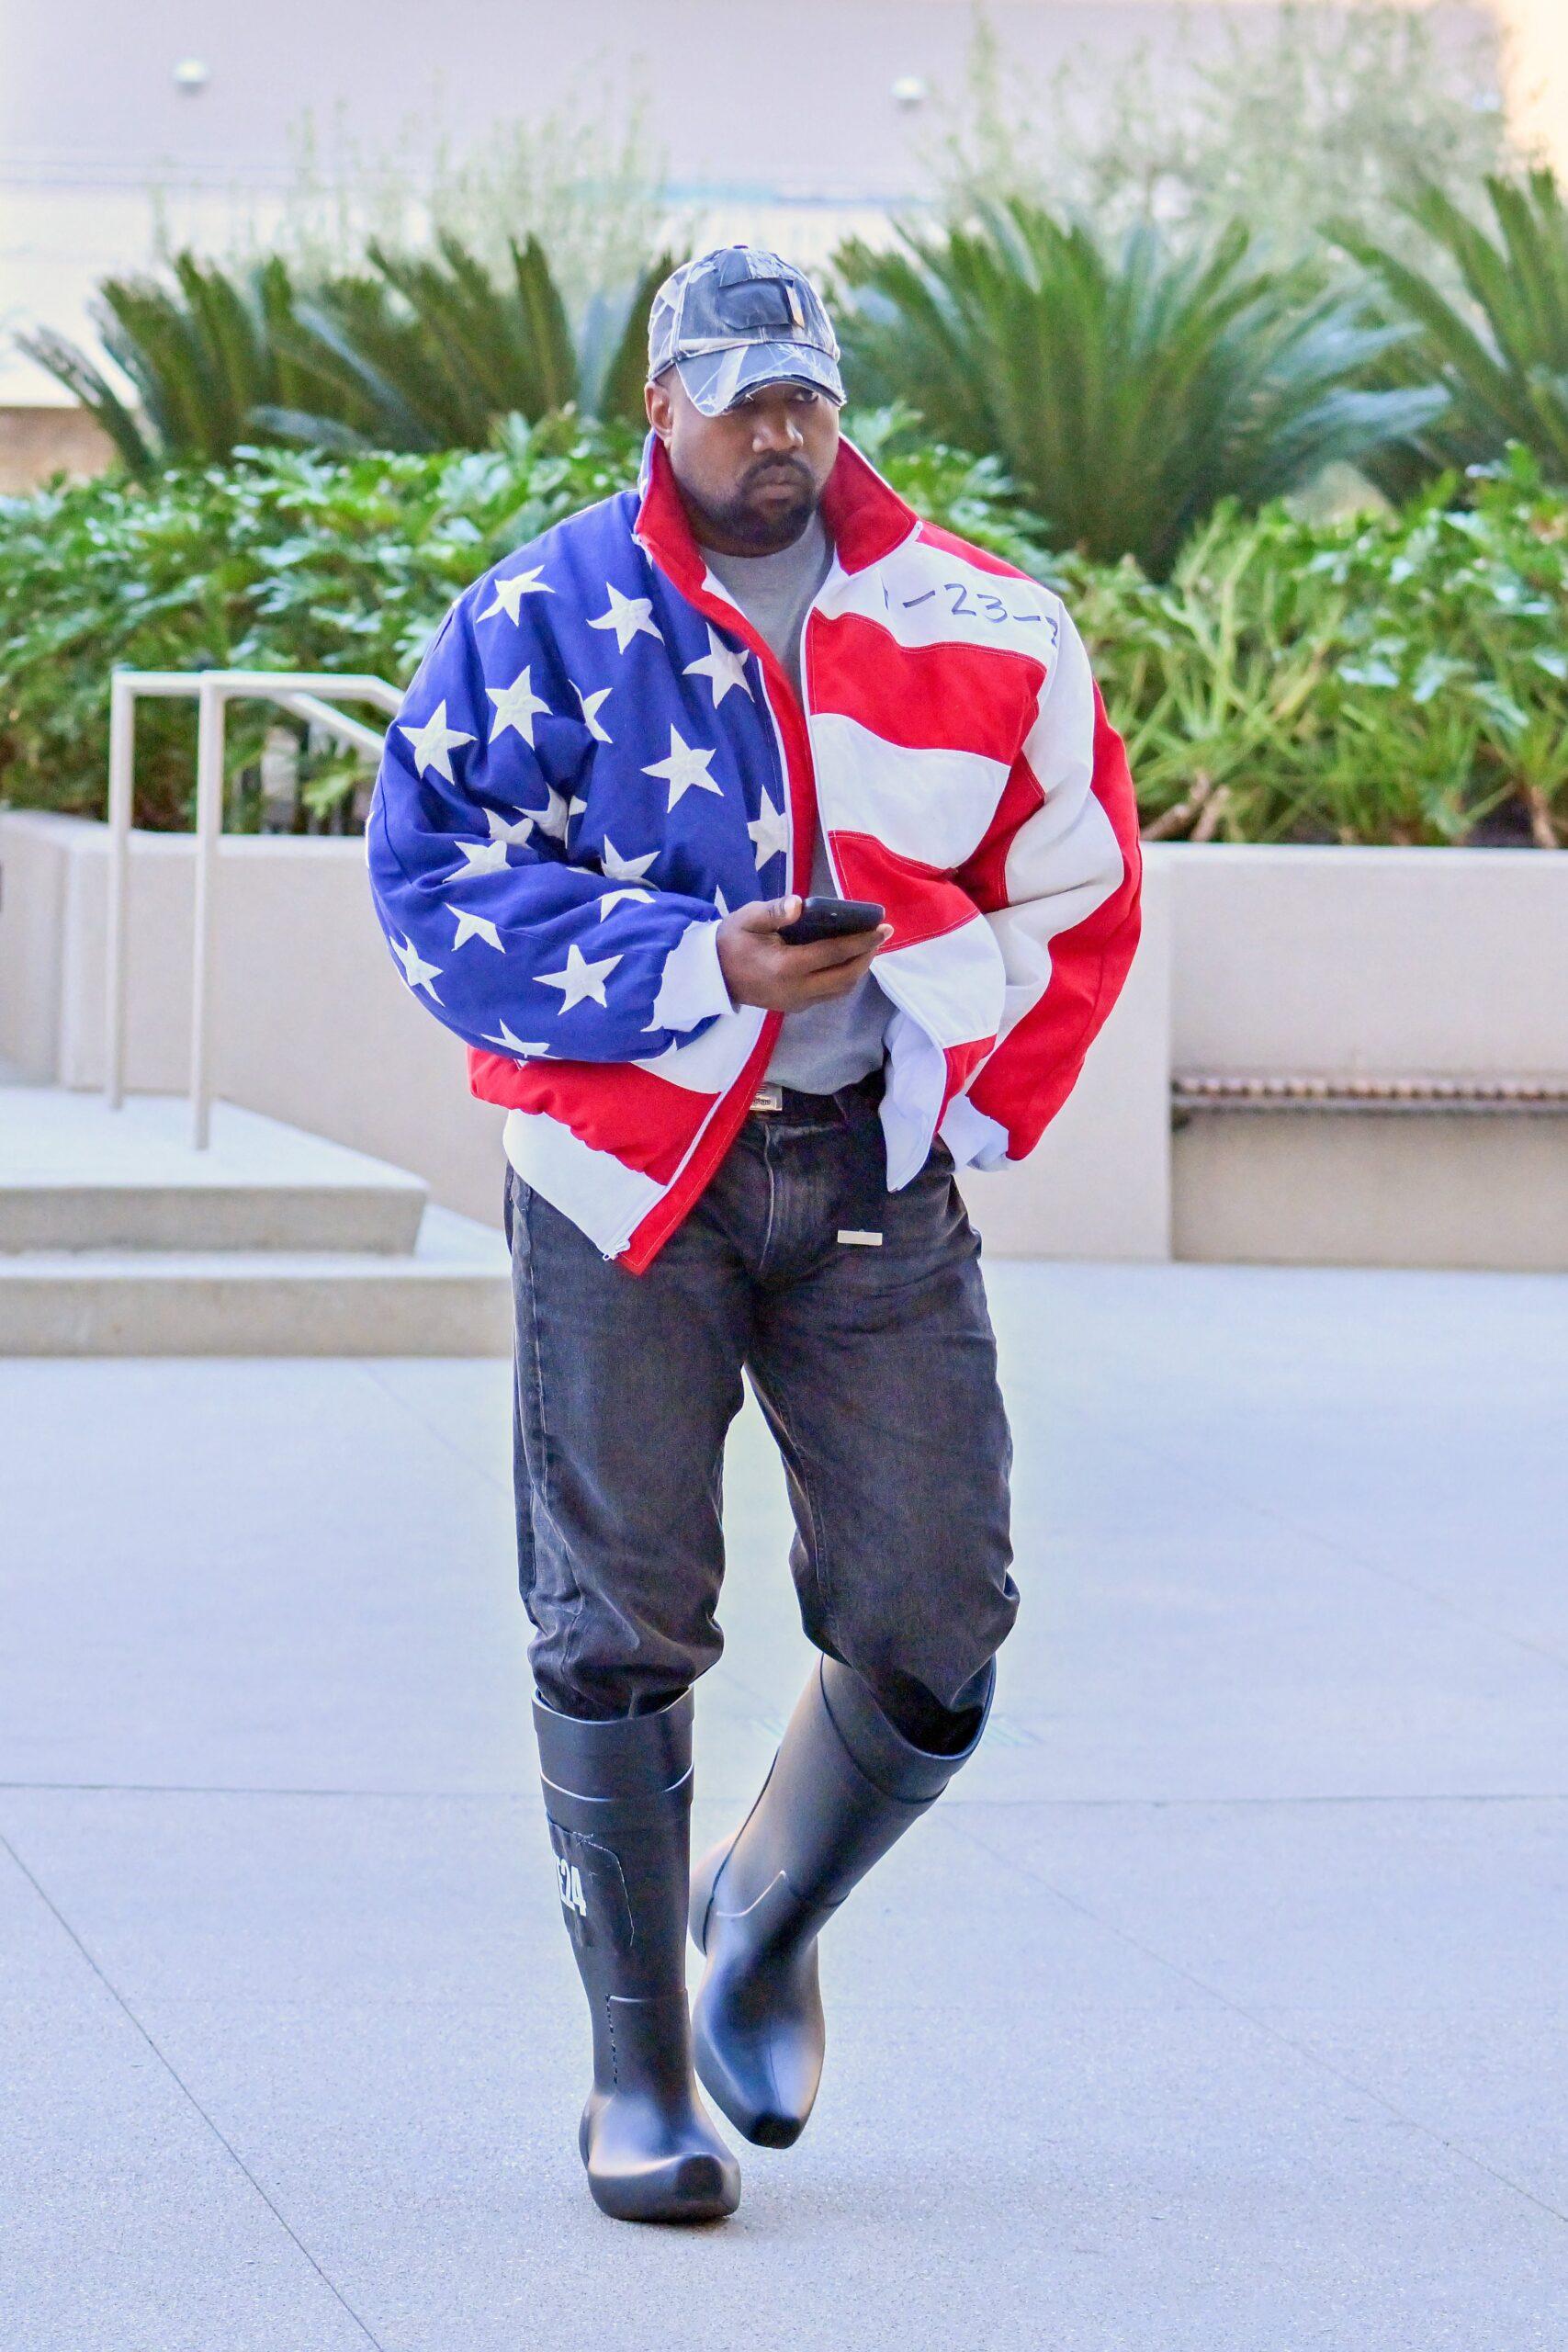 Kanye West heads to a meeting after heading to church wearing an American flag jacket